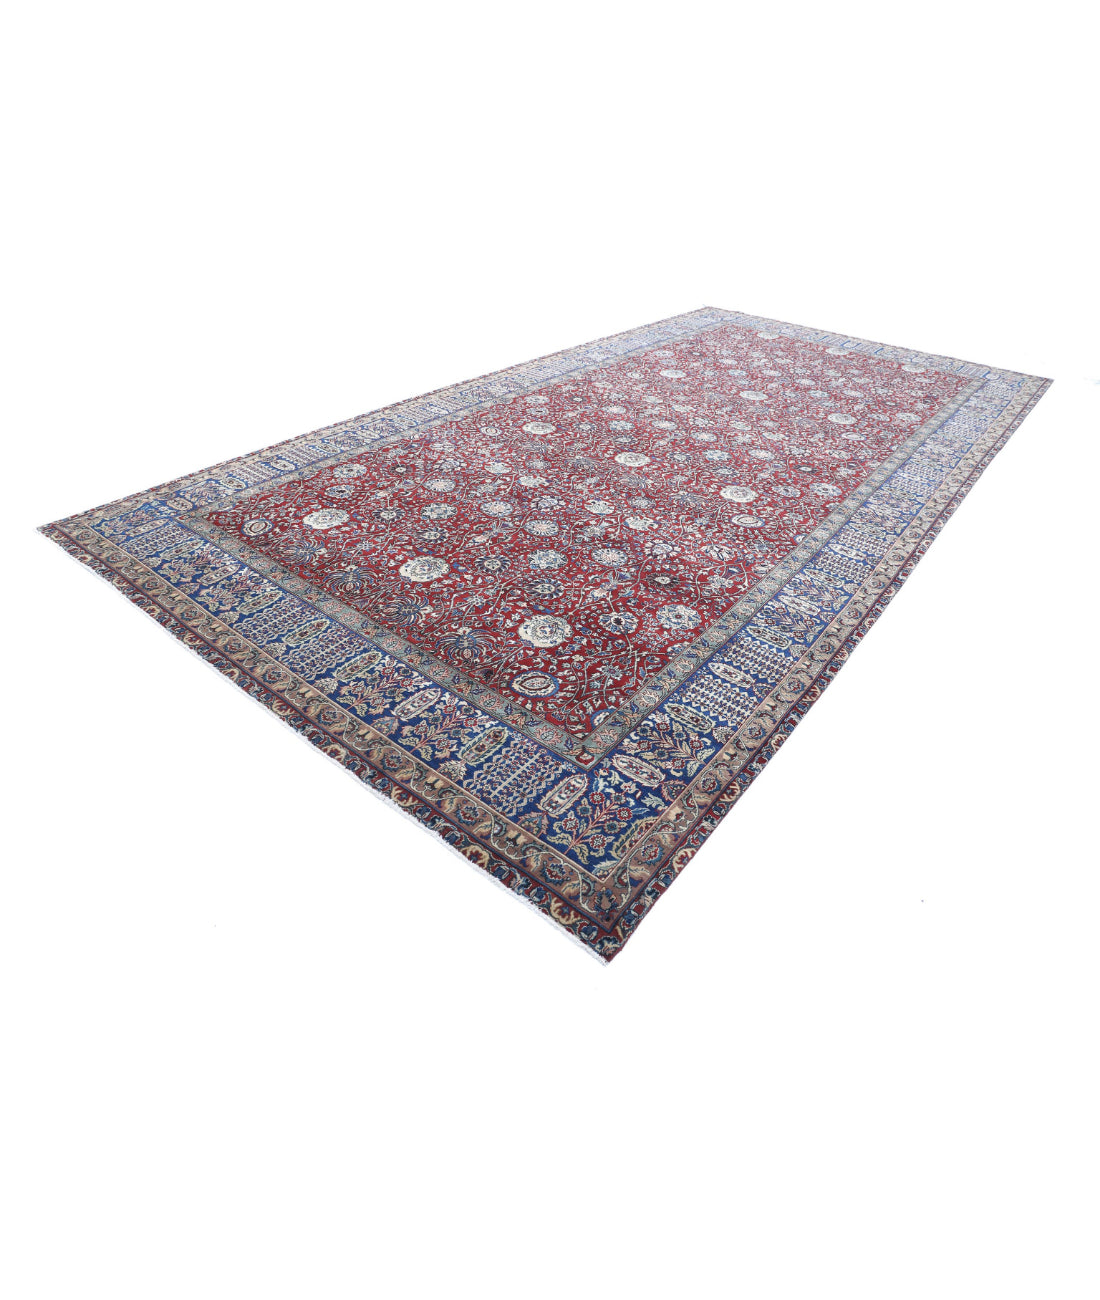 Heritage 9'0'' X 17'9'' Hand-Knotted Wool Rug 9'0'' x 17'9'' (150 X 210) / Red / Blue